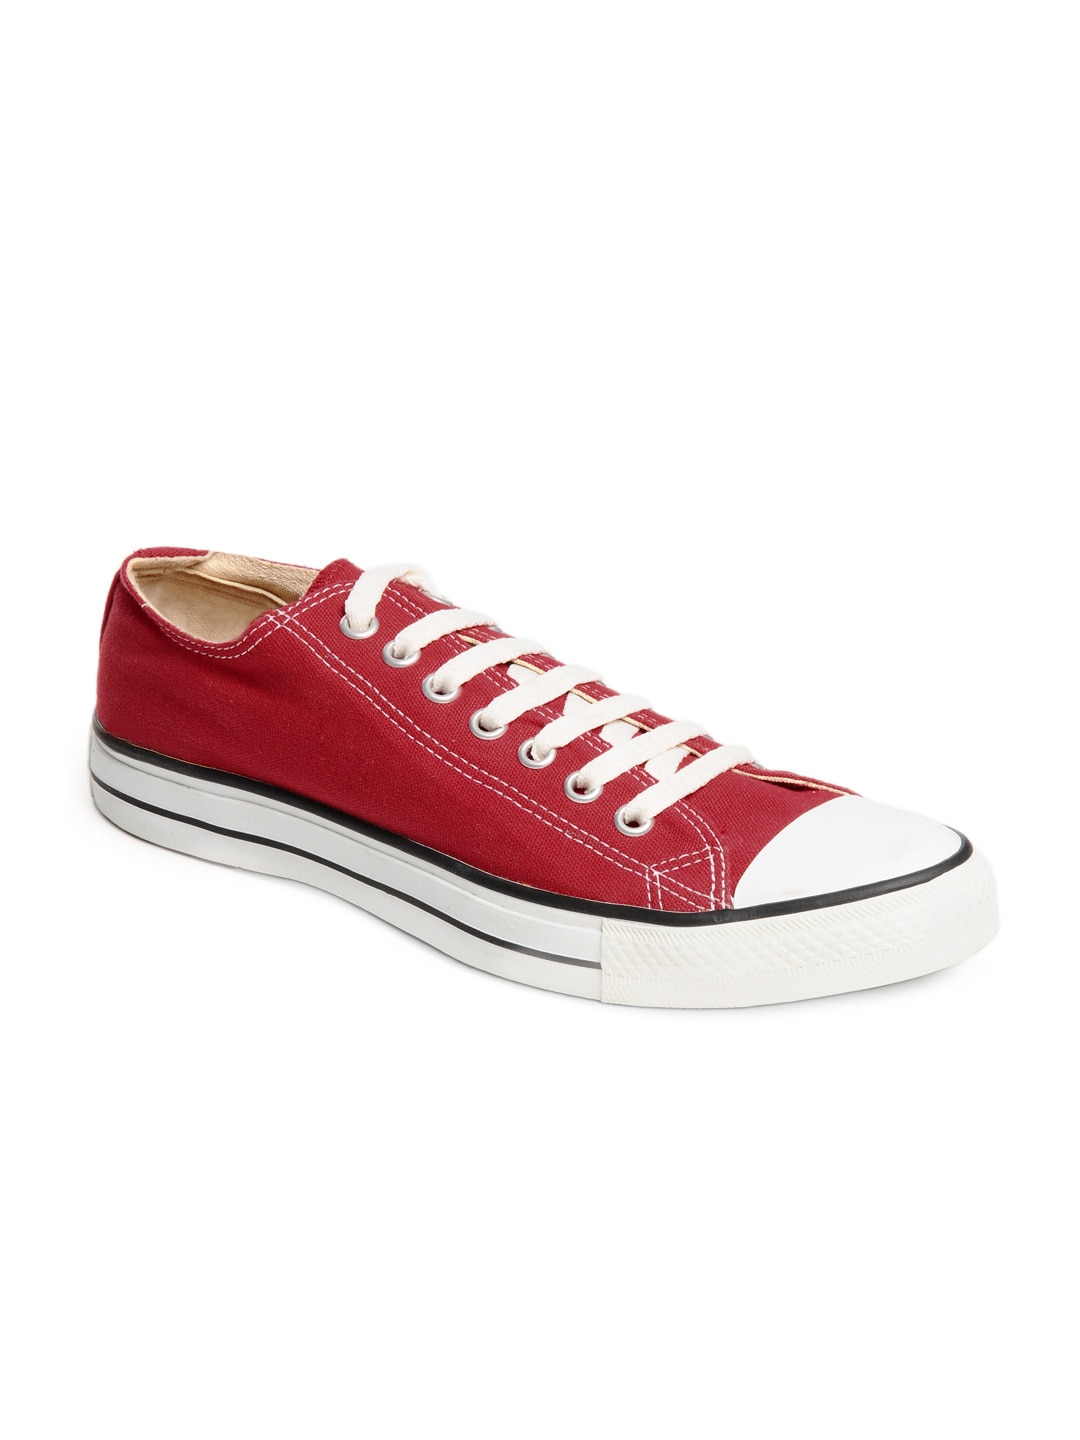 Converse Unisex Red Chuck Taylor All Star Canvas Shoes